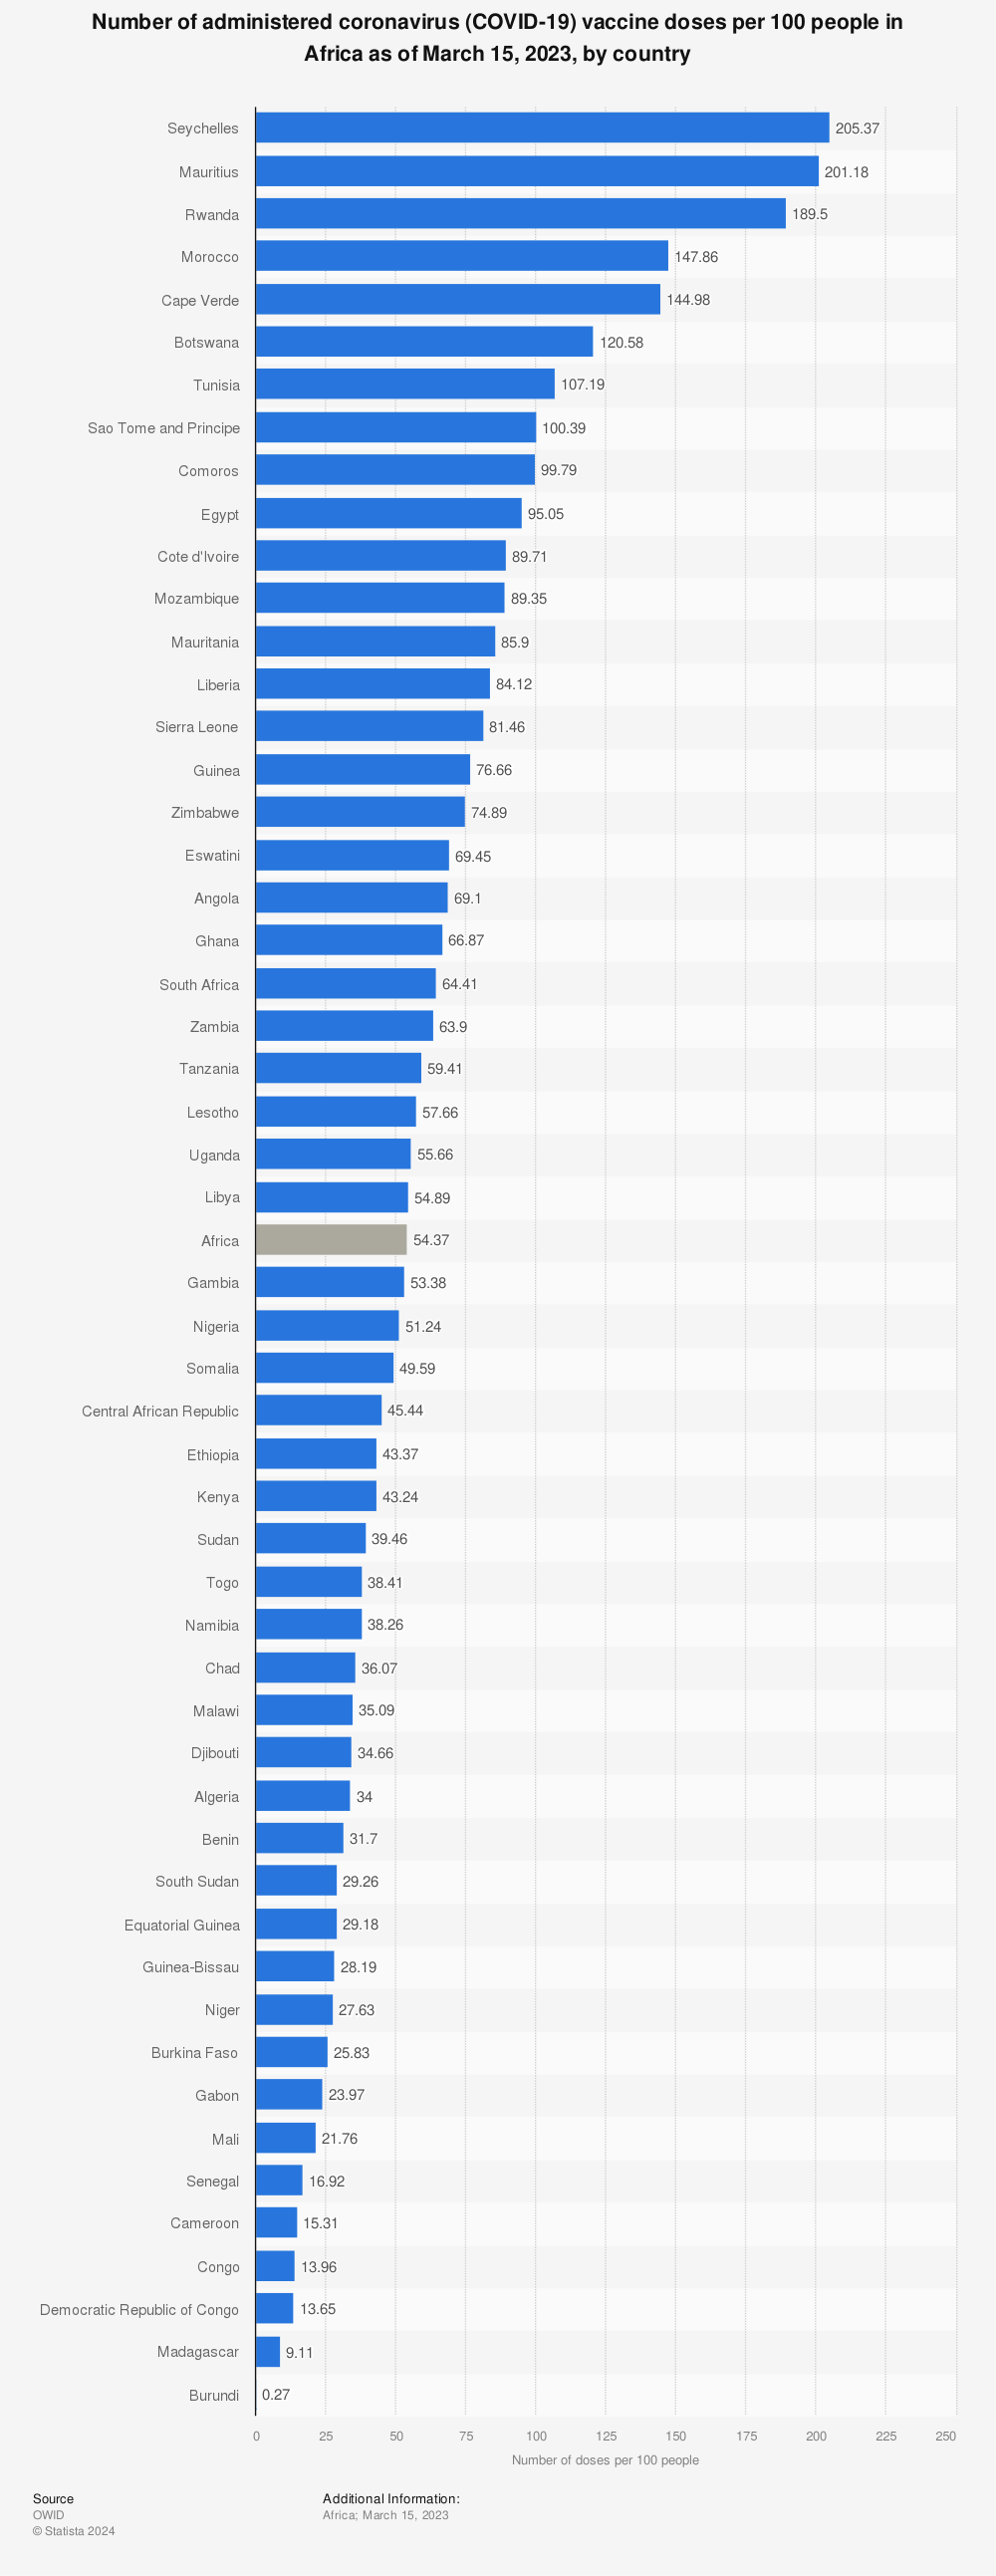 Statistic: Number of administered coronavirus (COVID-19) vaccine doses per 100 people in Africa as of January 4, 2023, by country | Statista